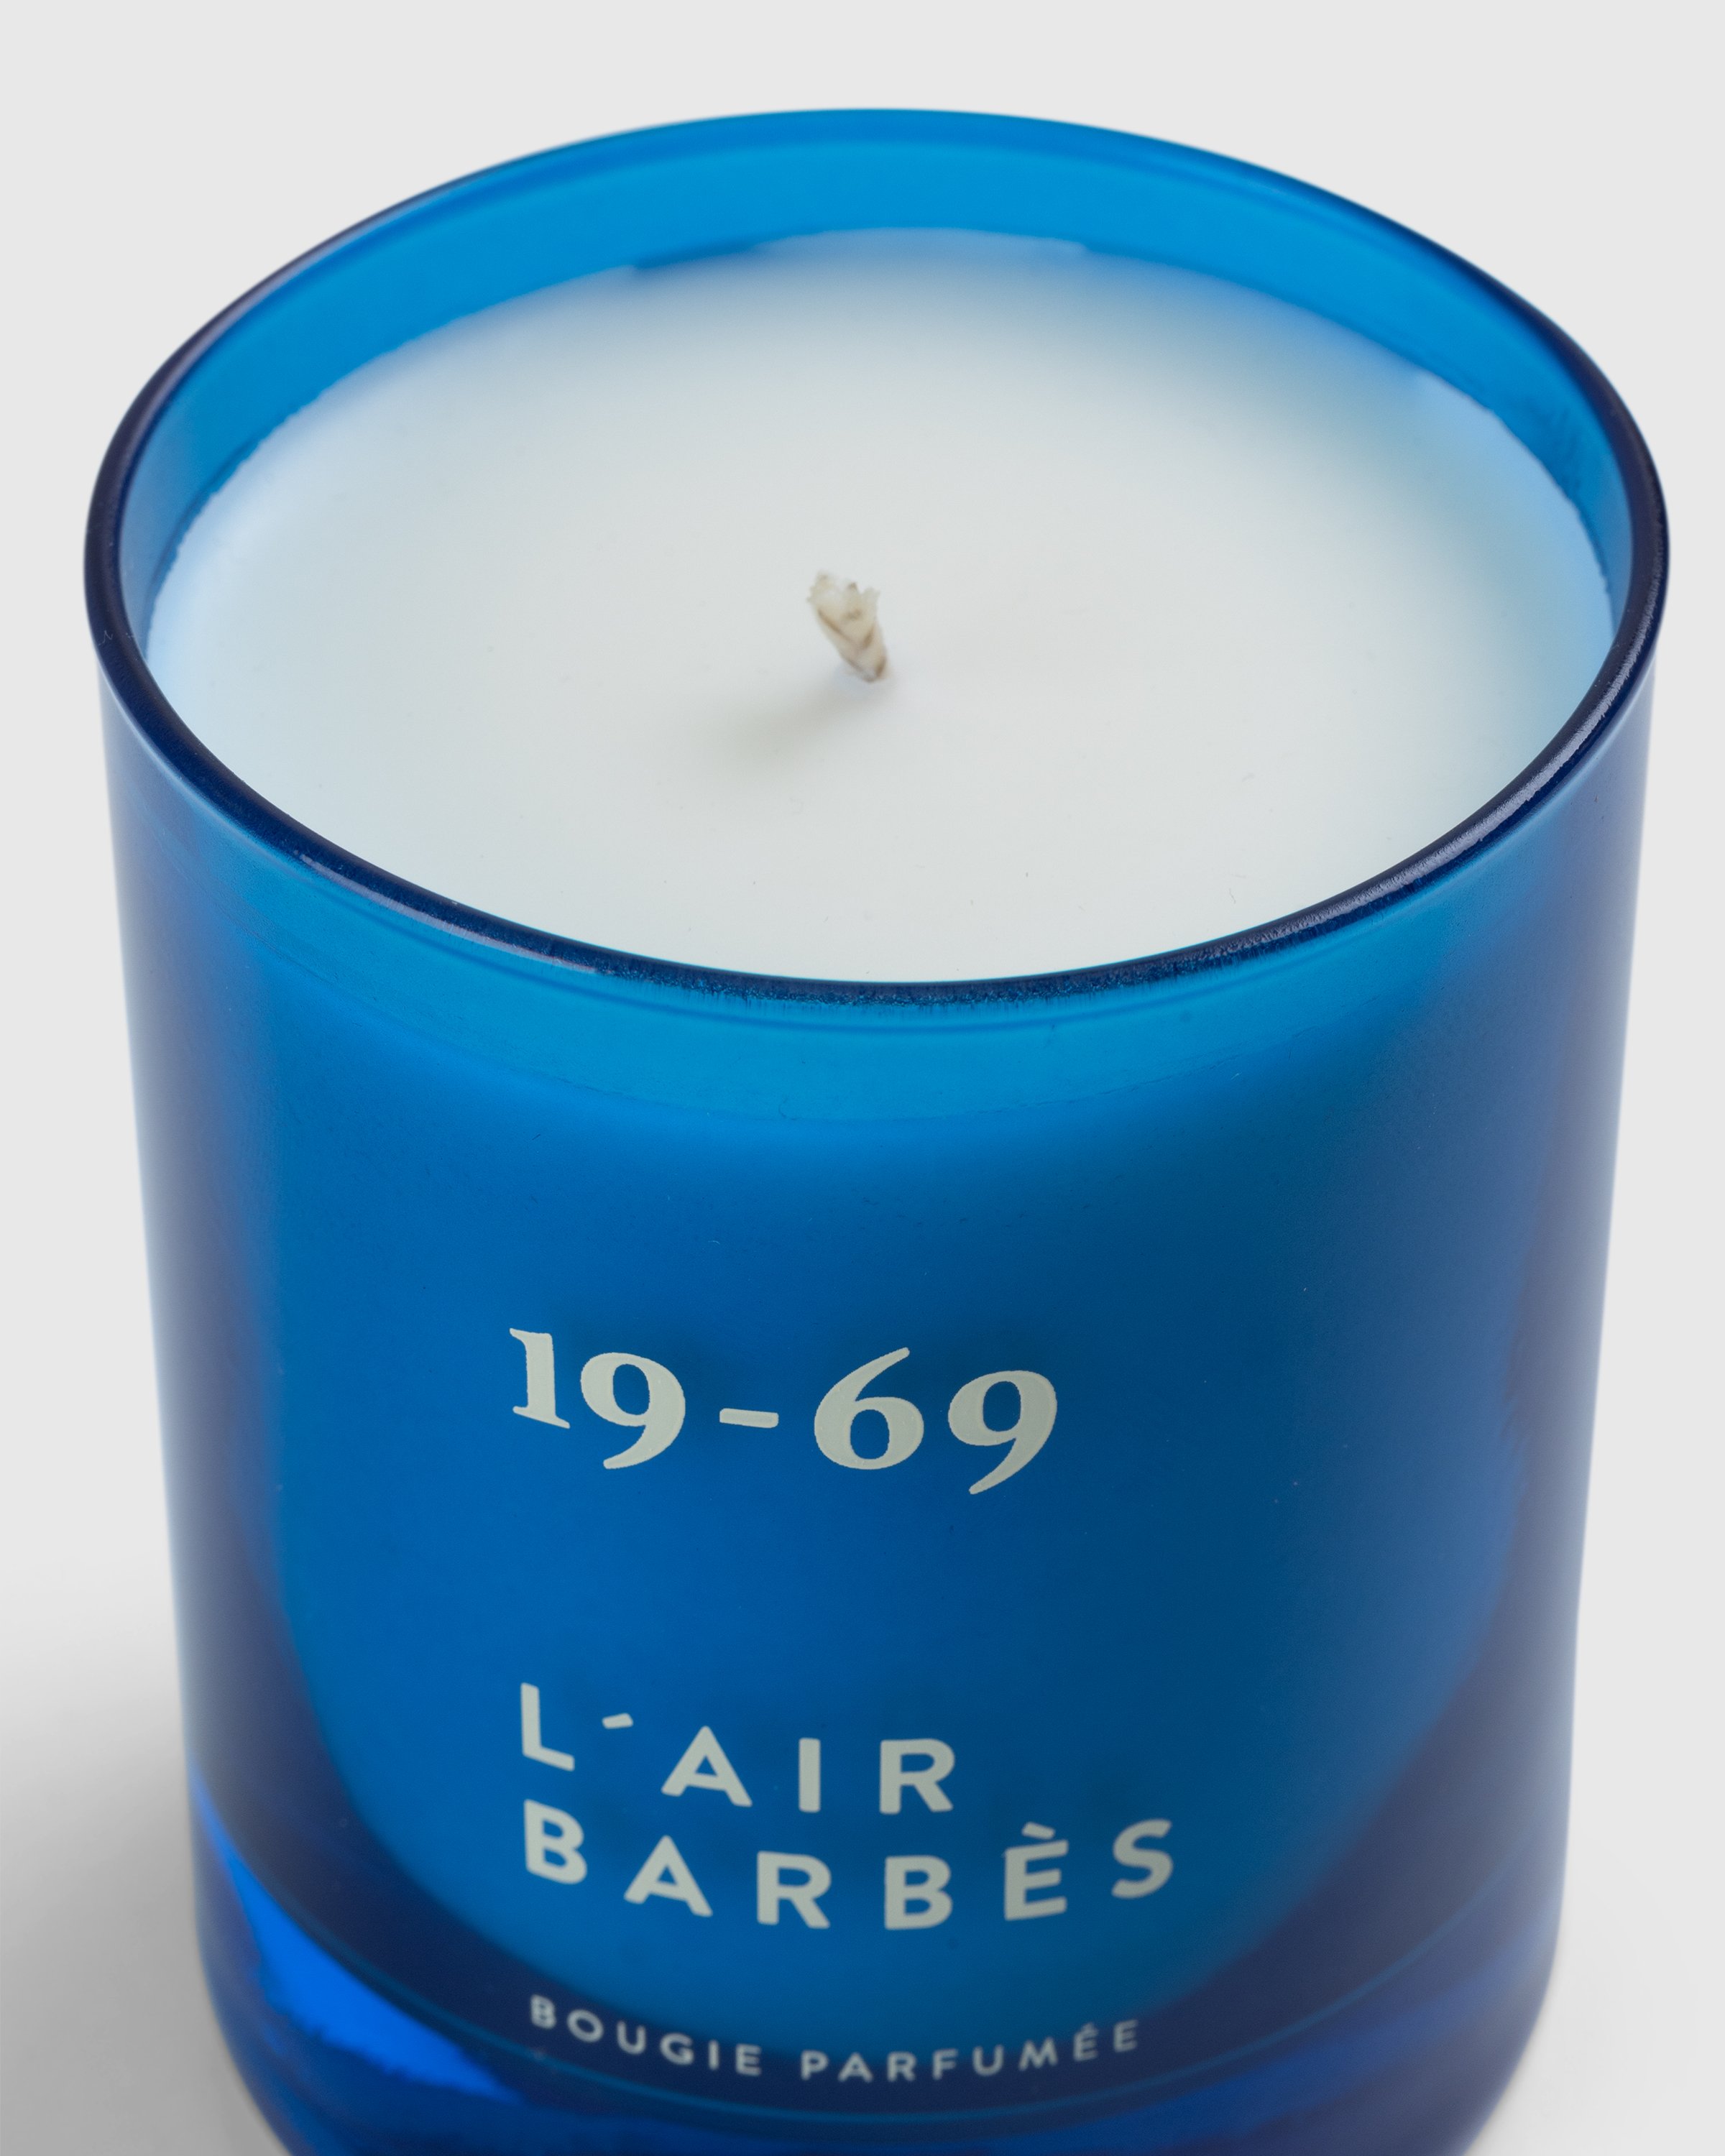 19-69 - L'air Barbes BP Candle - Lifestyle - Blue - Image 3